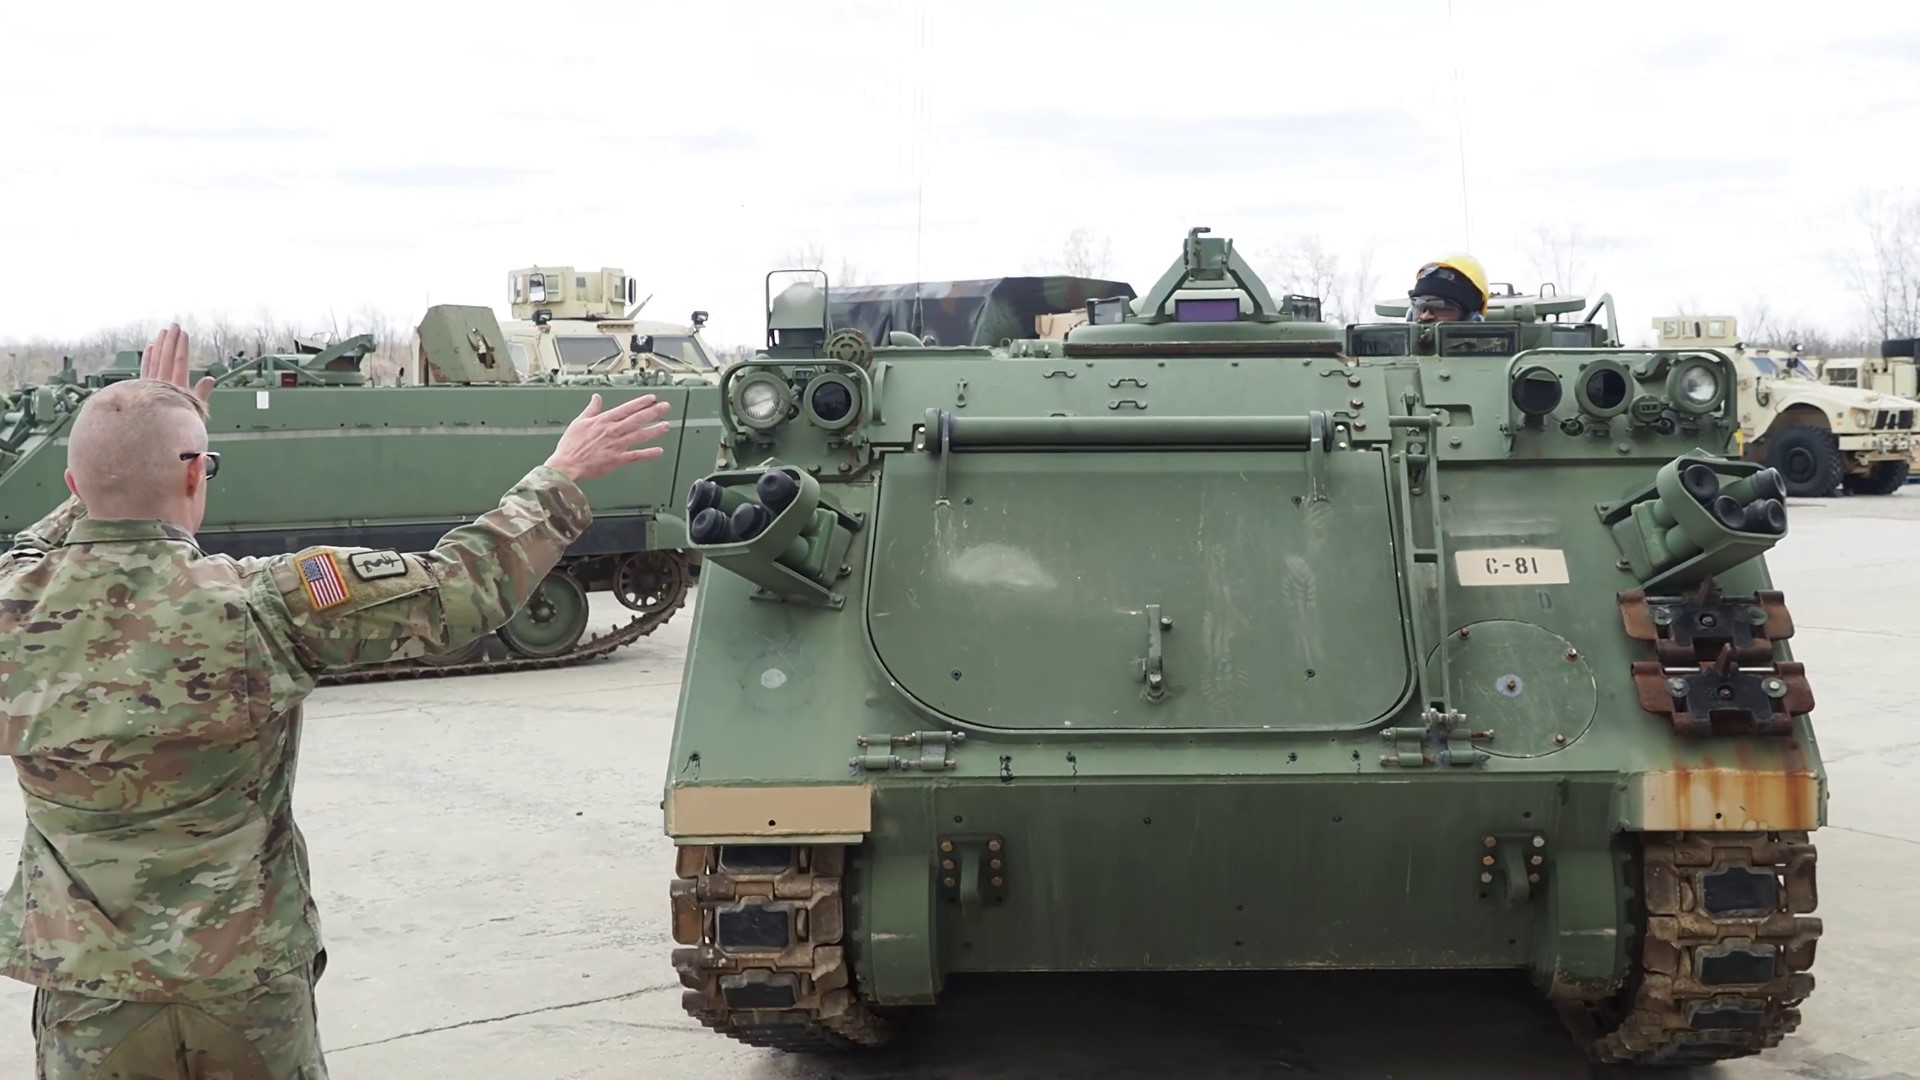 Guardsmen prepared M113 Armored Personnel Carriers for transport, as part of a U.S. initiative to support Ukrainians in the defense of their nation.